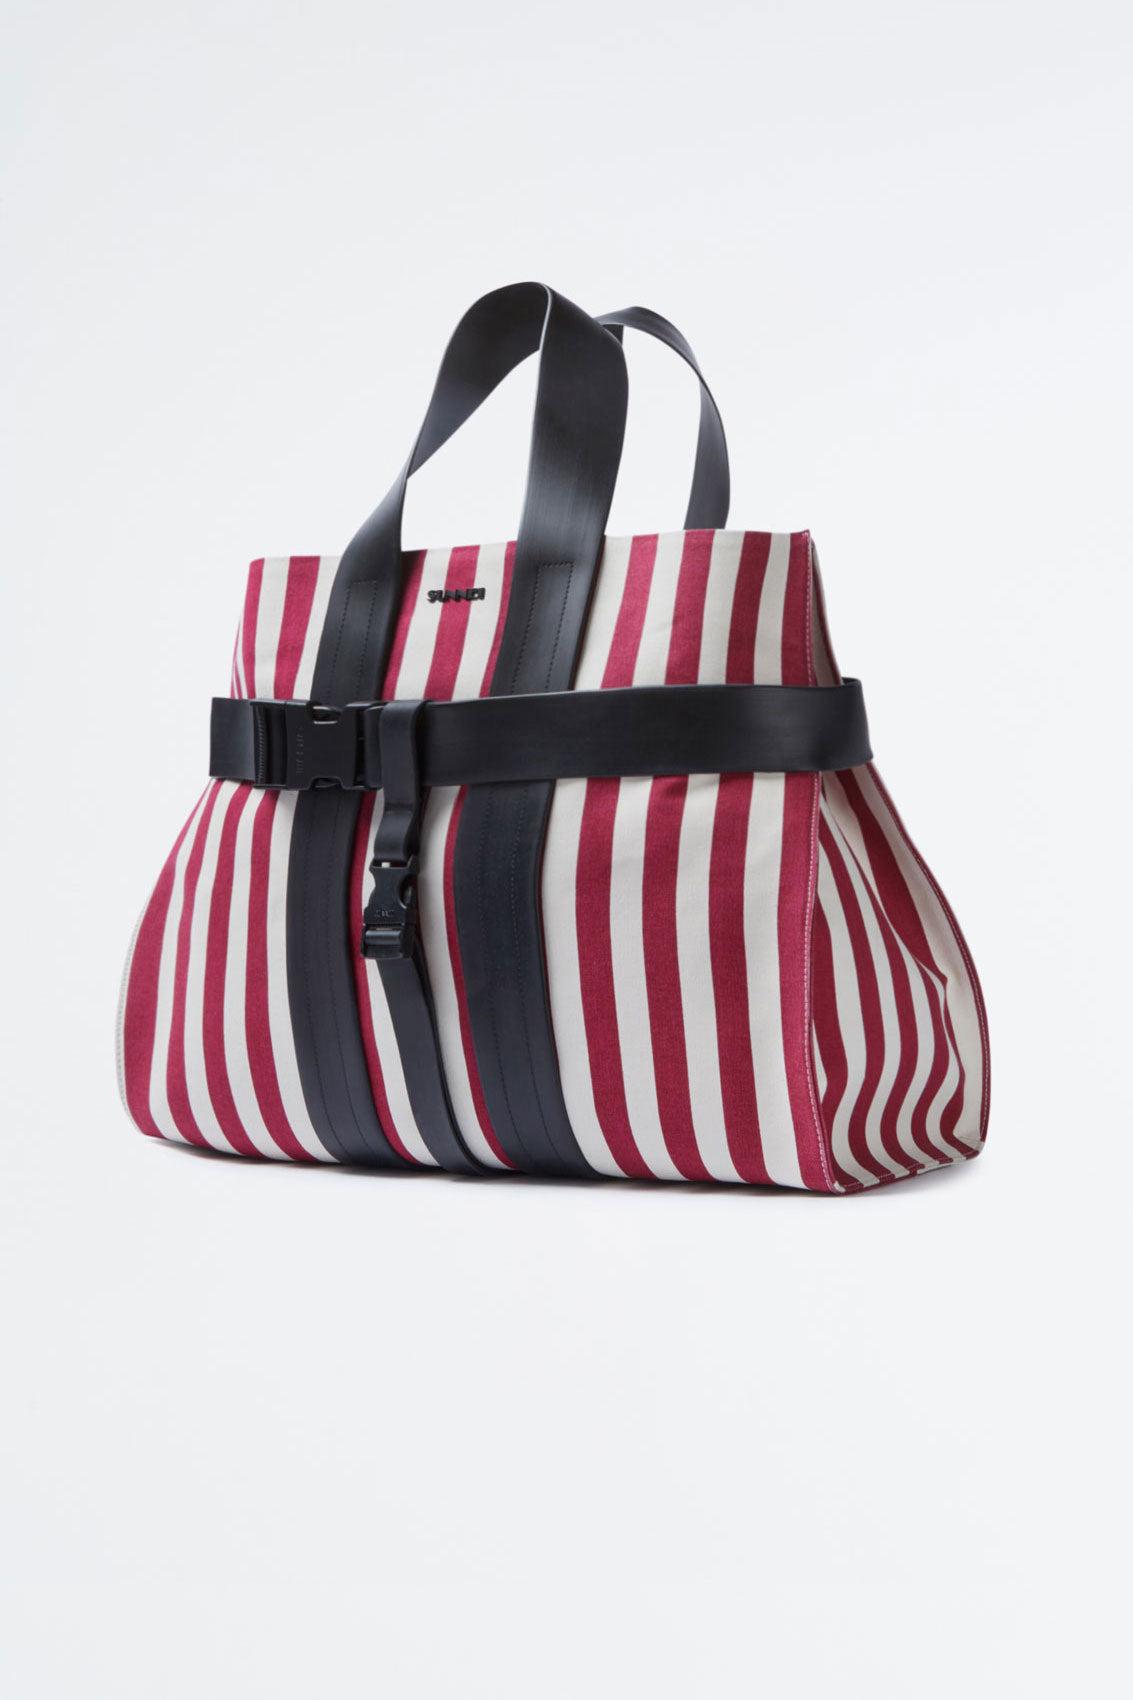 Sunnei Bordeaux Striped Messenger Parallelepipedo Bag in Red 